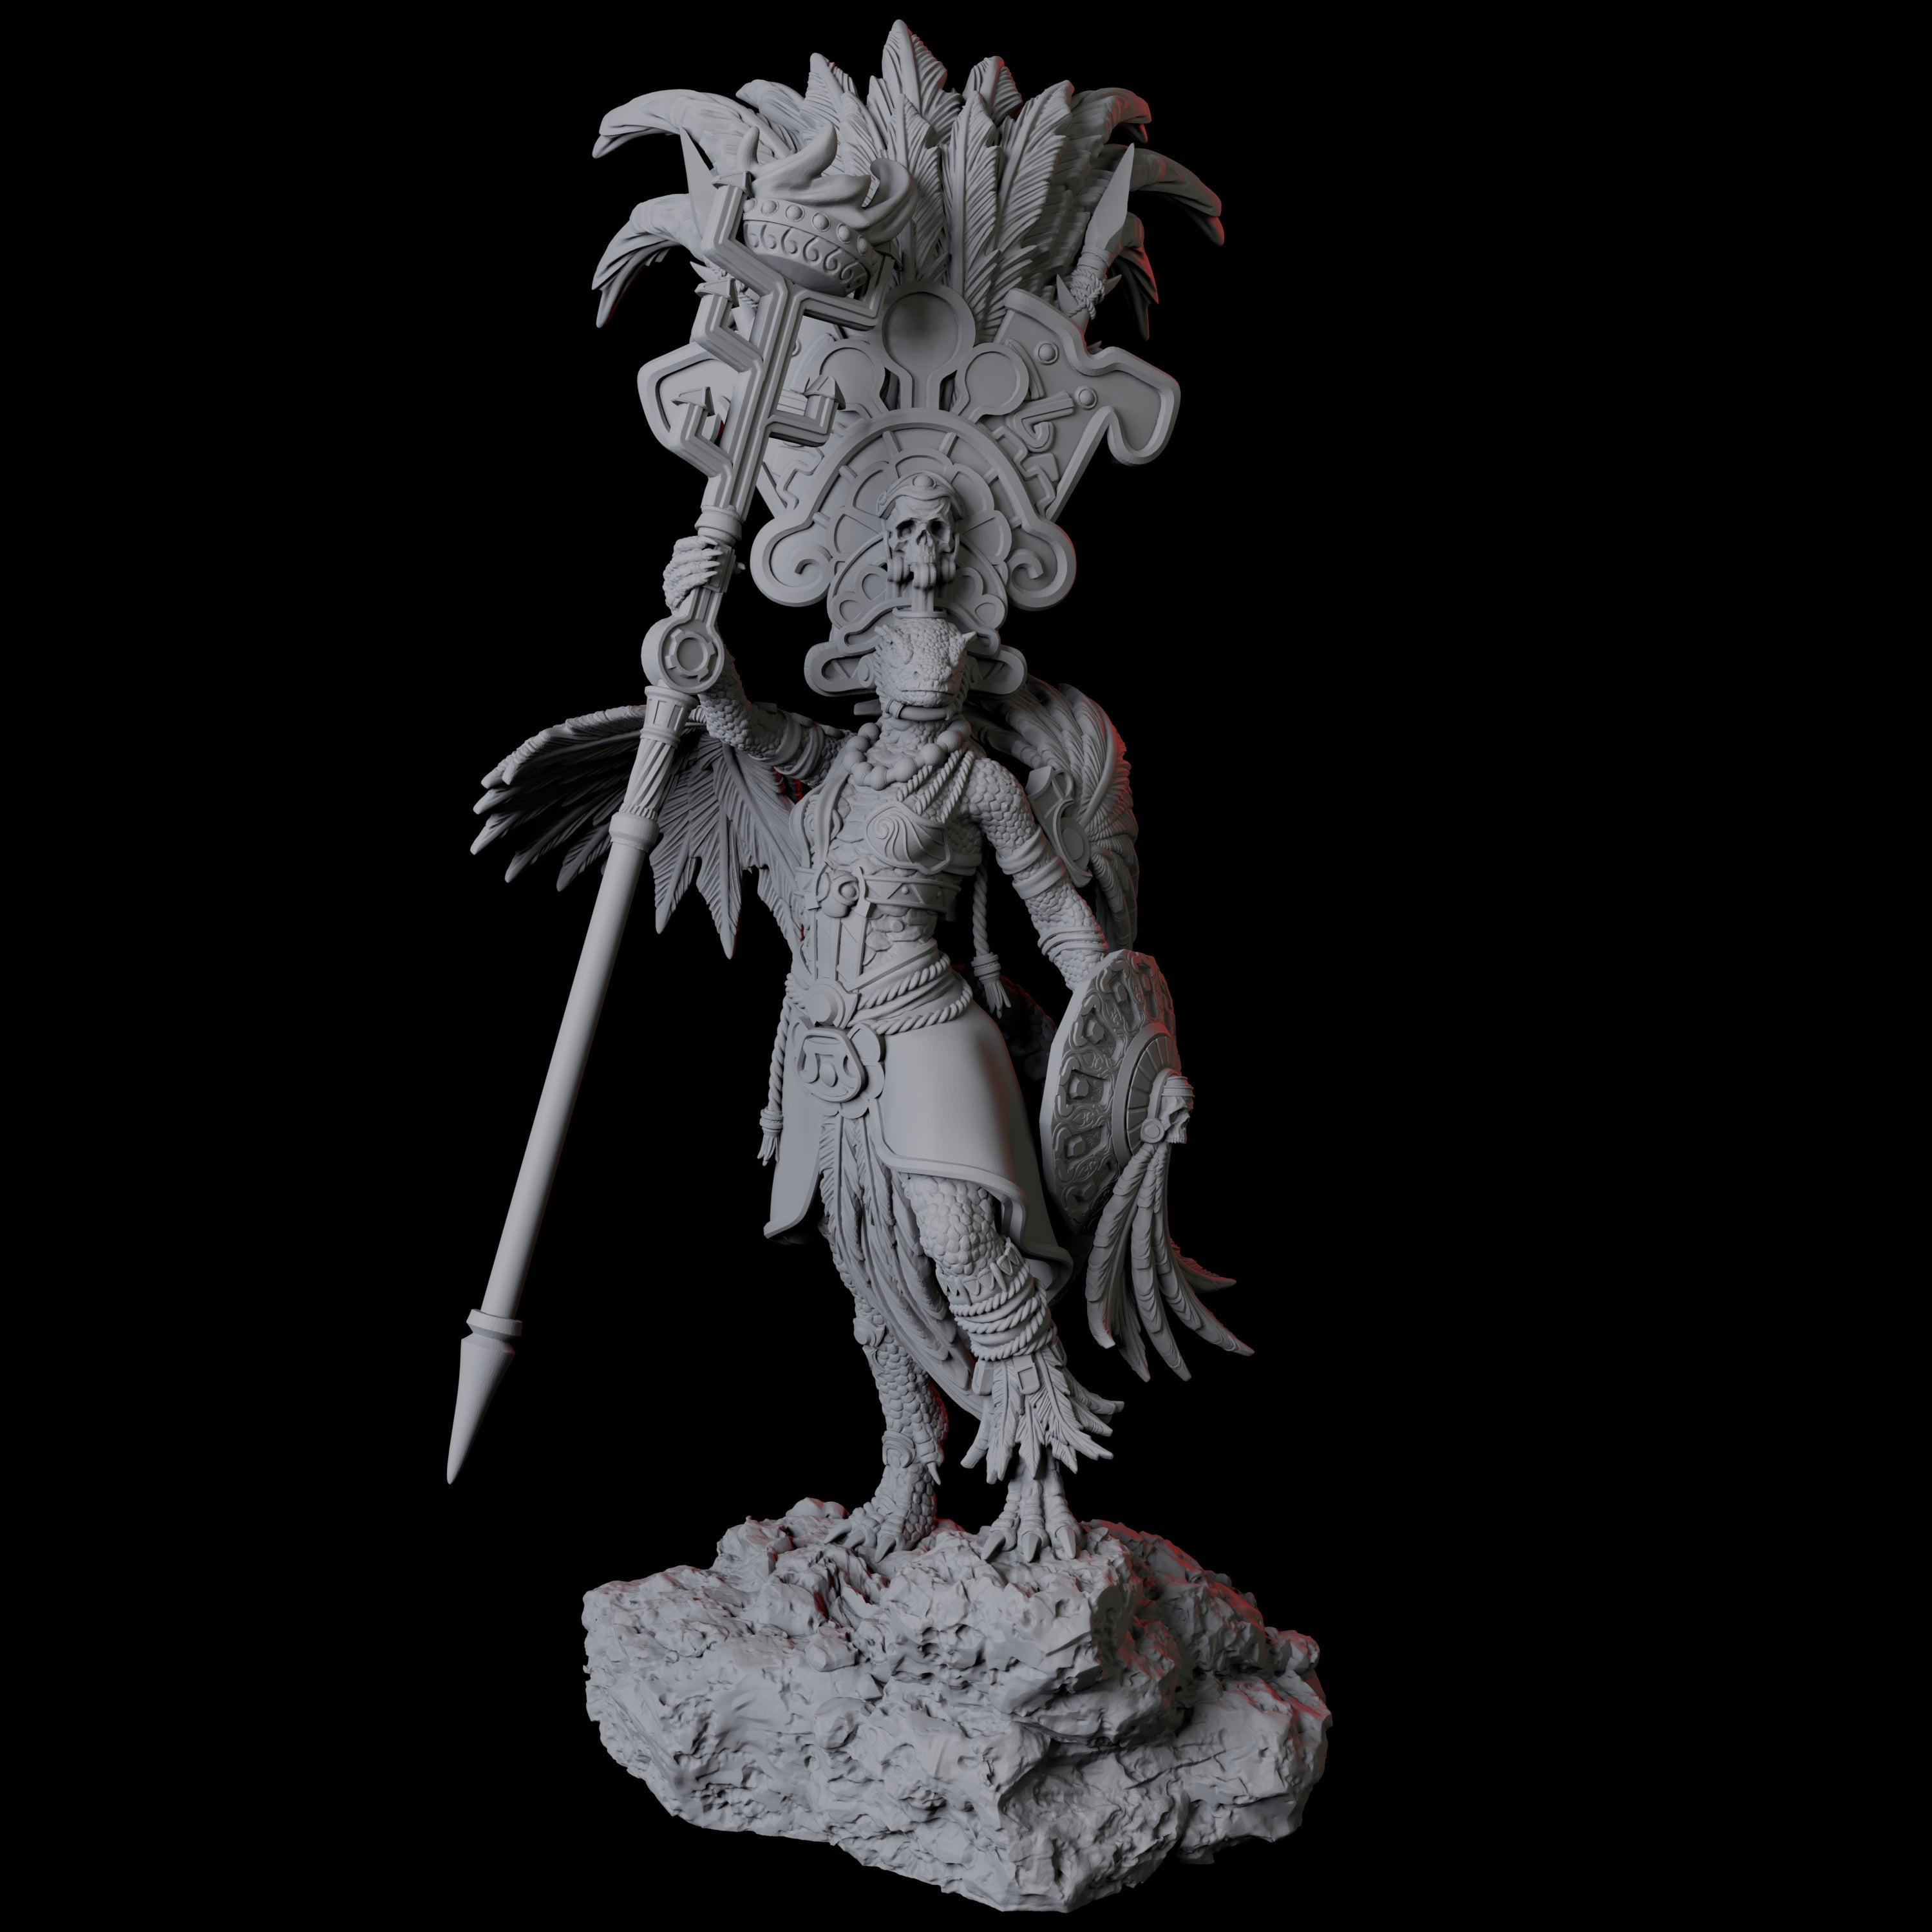 Lizardfolk Sundancer B Miniature for Dungeons and Dragons, Pathfinder or other TTRPGs